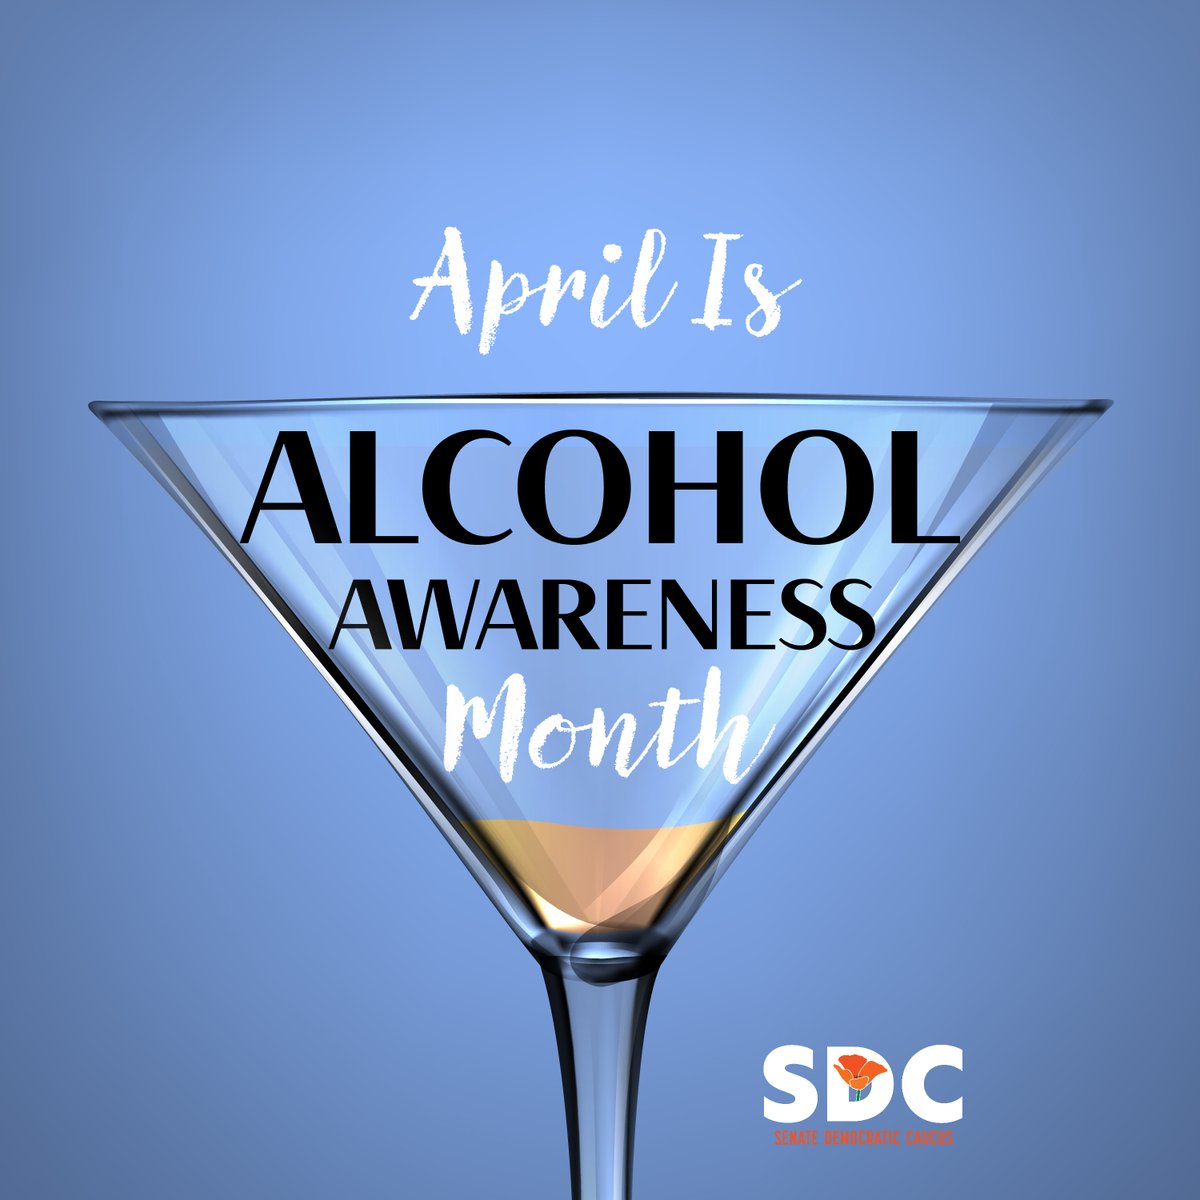 A new study by the CDC shows that there were nearly 500 alcohol-related deaths per day in 2021. This month - Alcohol Awareness Month - let's raise awareness about alcohol abuse and dependency before it is fatal. #AlcoholAwarenessMonth #CALeg #CASenateDems